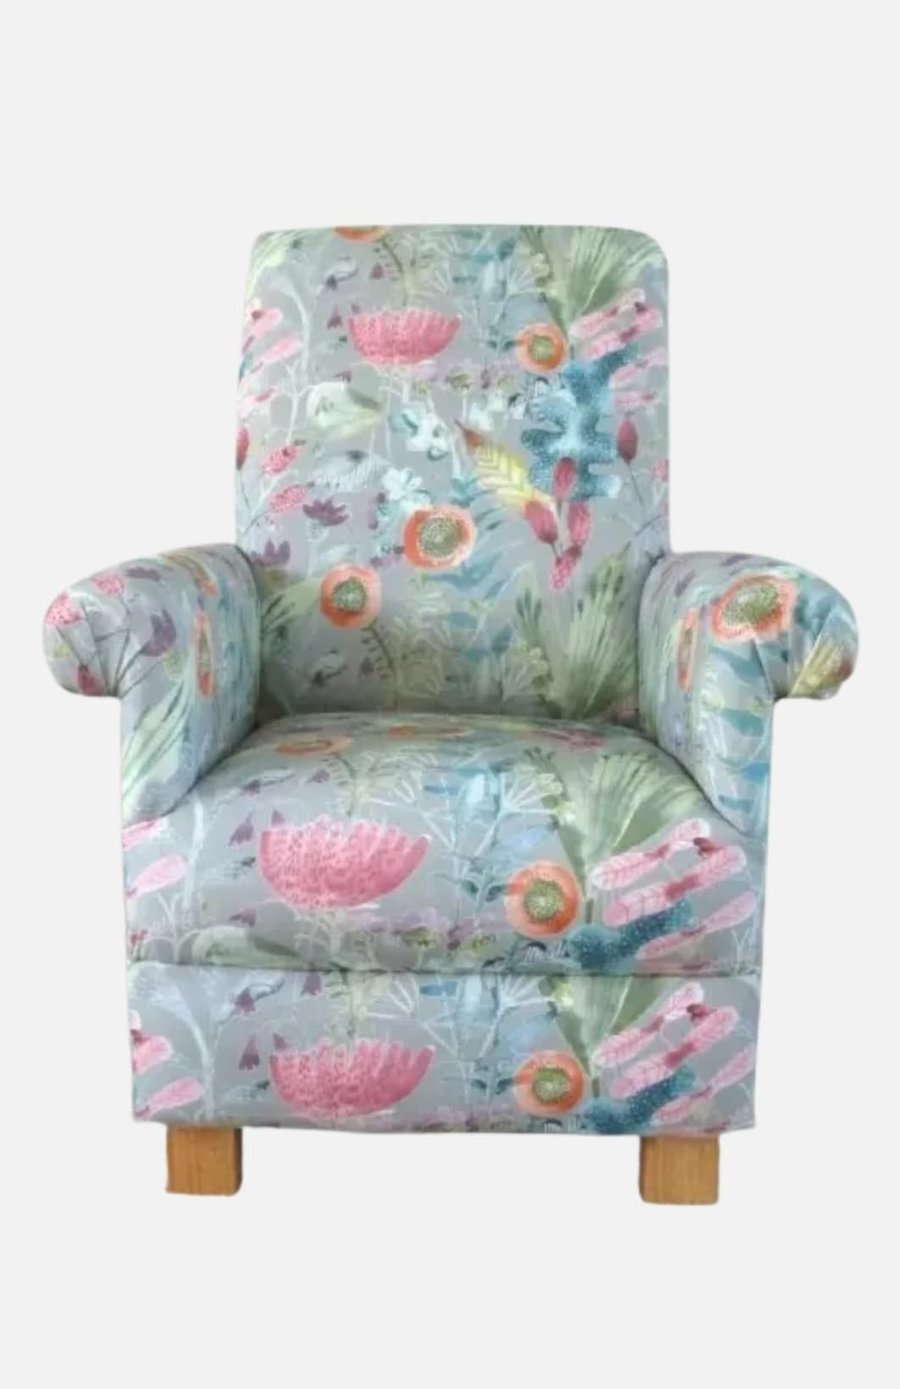 Voyage Maizey Persimmon Armchair Adult Floral Chair Grey Pink Accent Bedroom